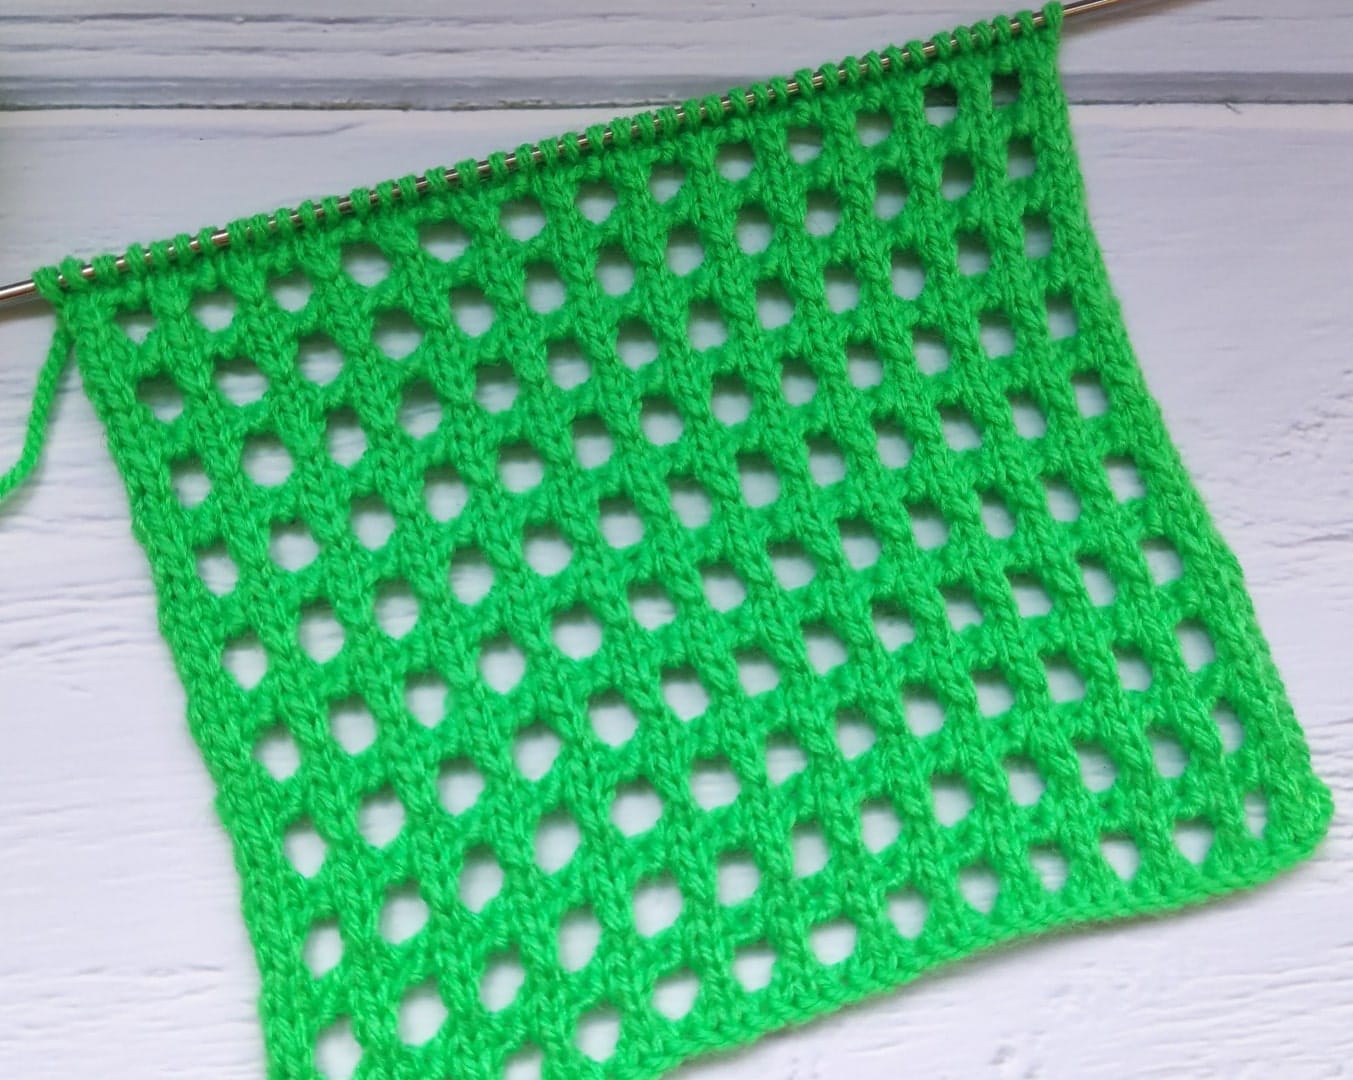 Knit Mesh Photos, Images and Pictures